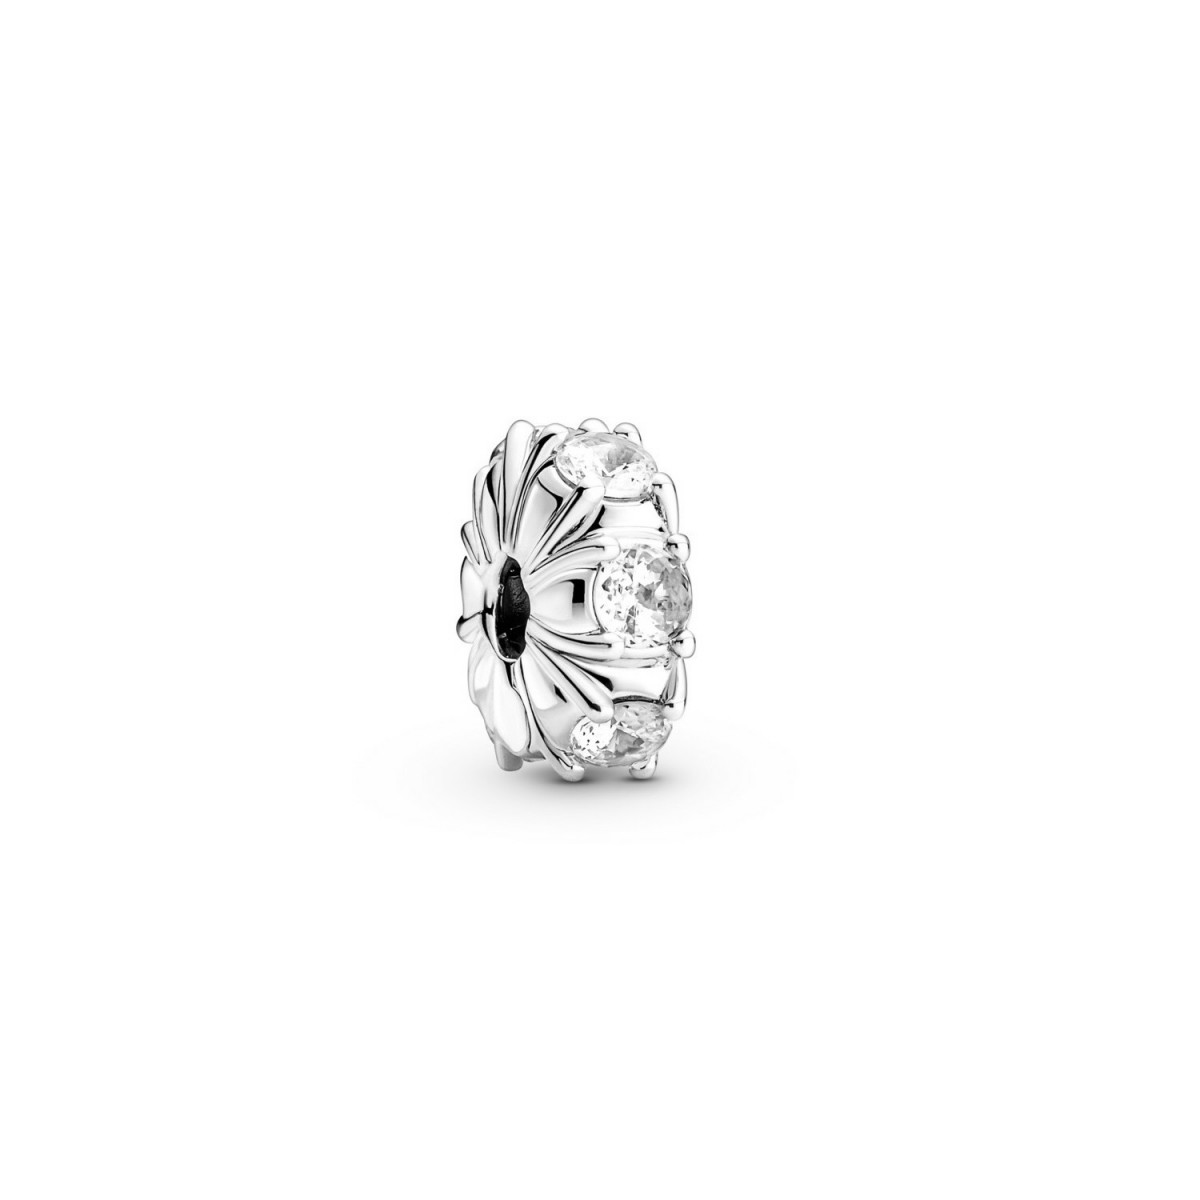 PANDORA STERLING SILVER CLIP WITH CLEAR CUBIC ZIRCONIA AND SILICONE GRIP - 790046C01